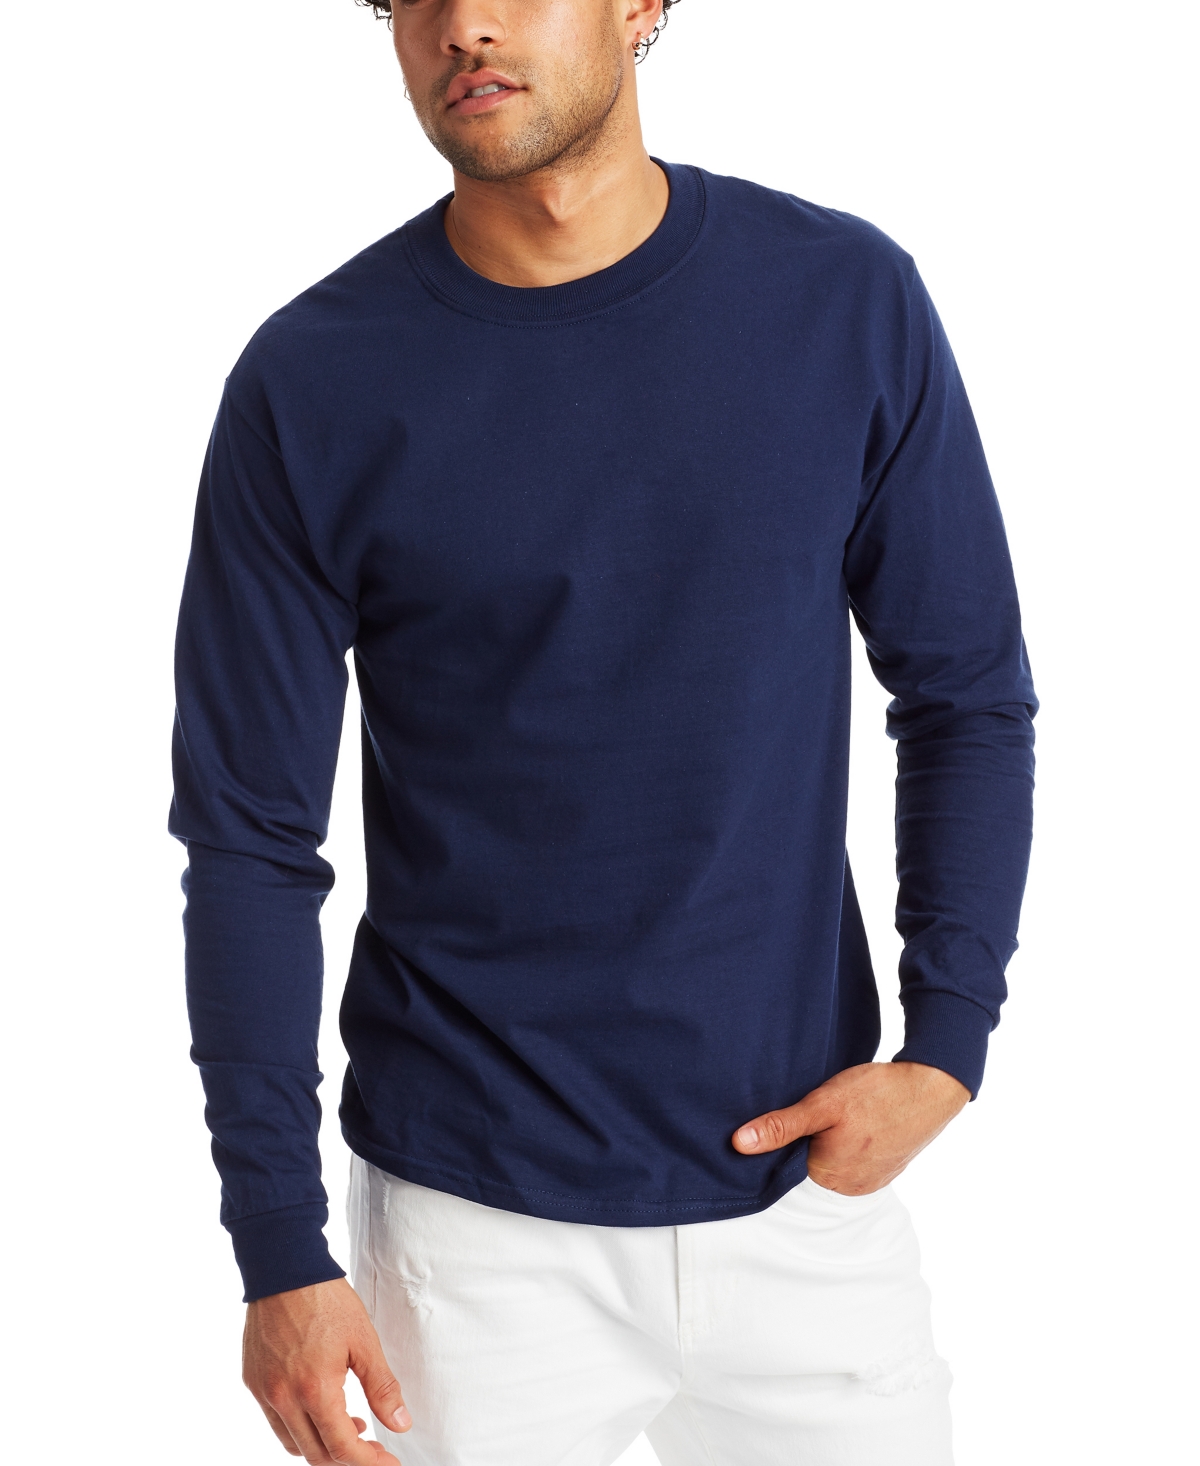 Hanes Beefy-t Unisex Long-sleeve T-shirt, 2-pack In Navy